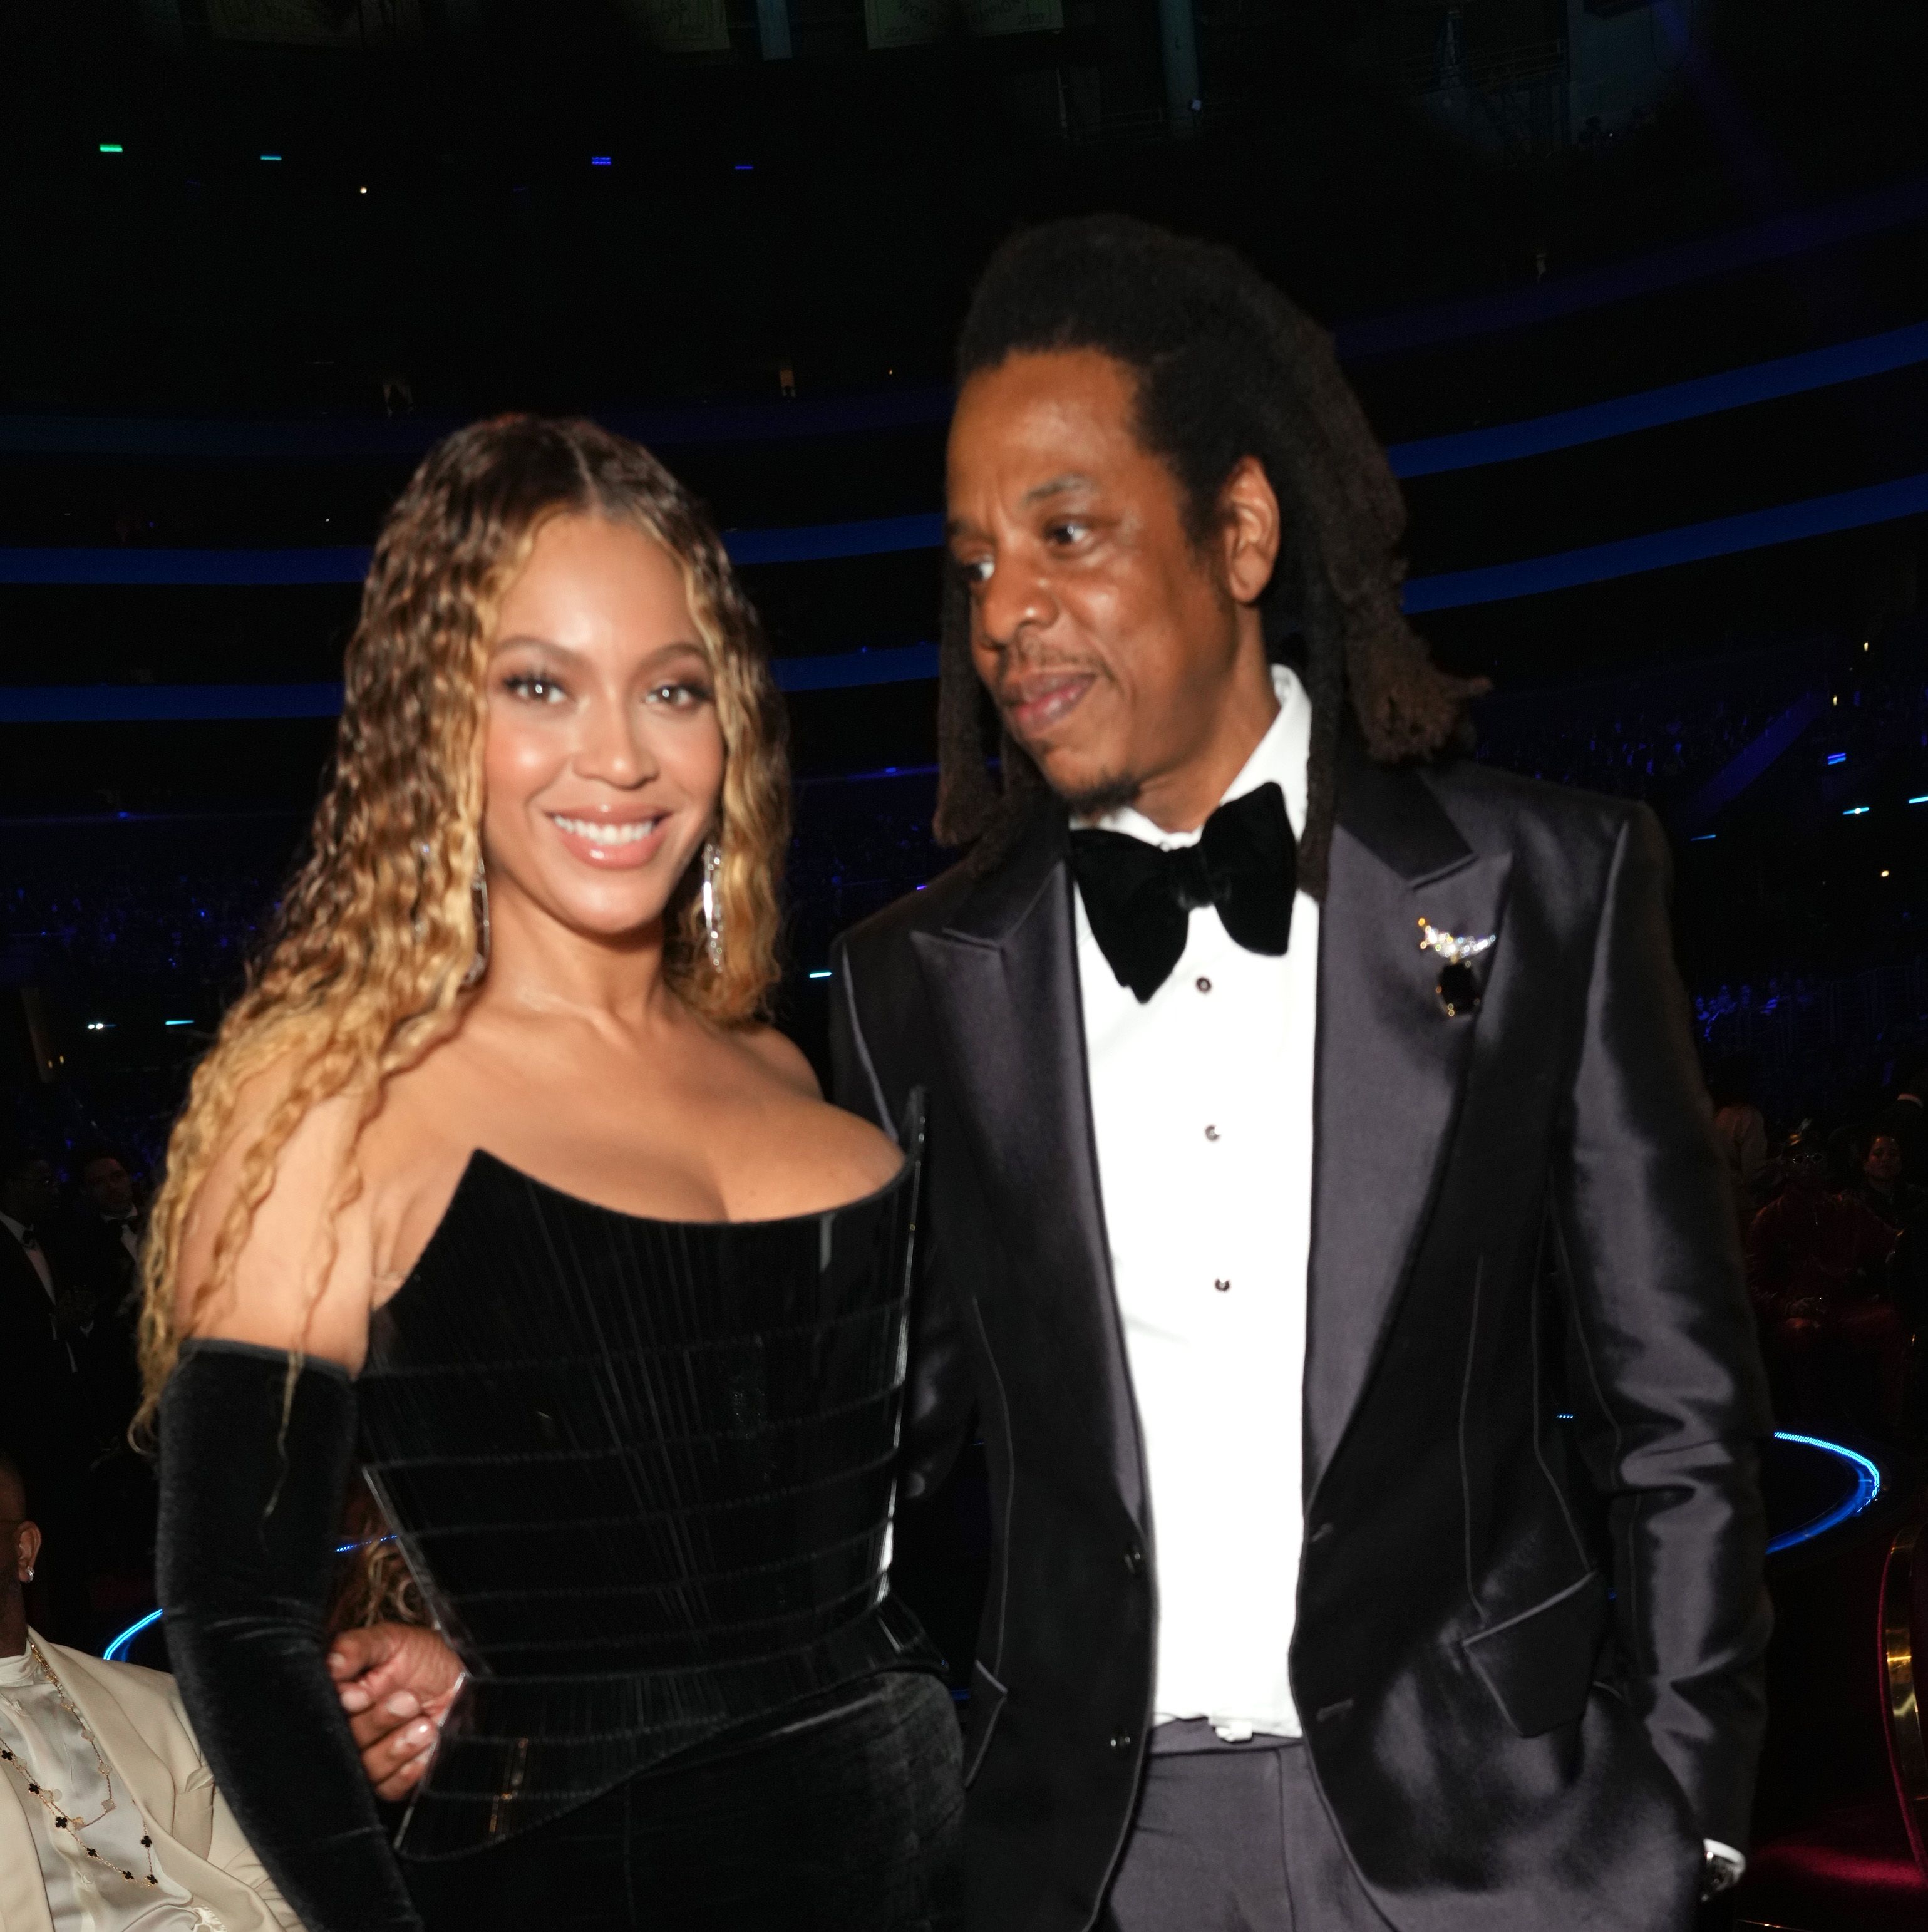 Beyoncé and Jay-Z Just Spent $200 Million on the Most Expensive Home Ever Sold in California